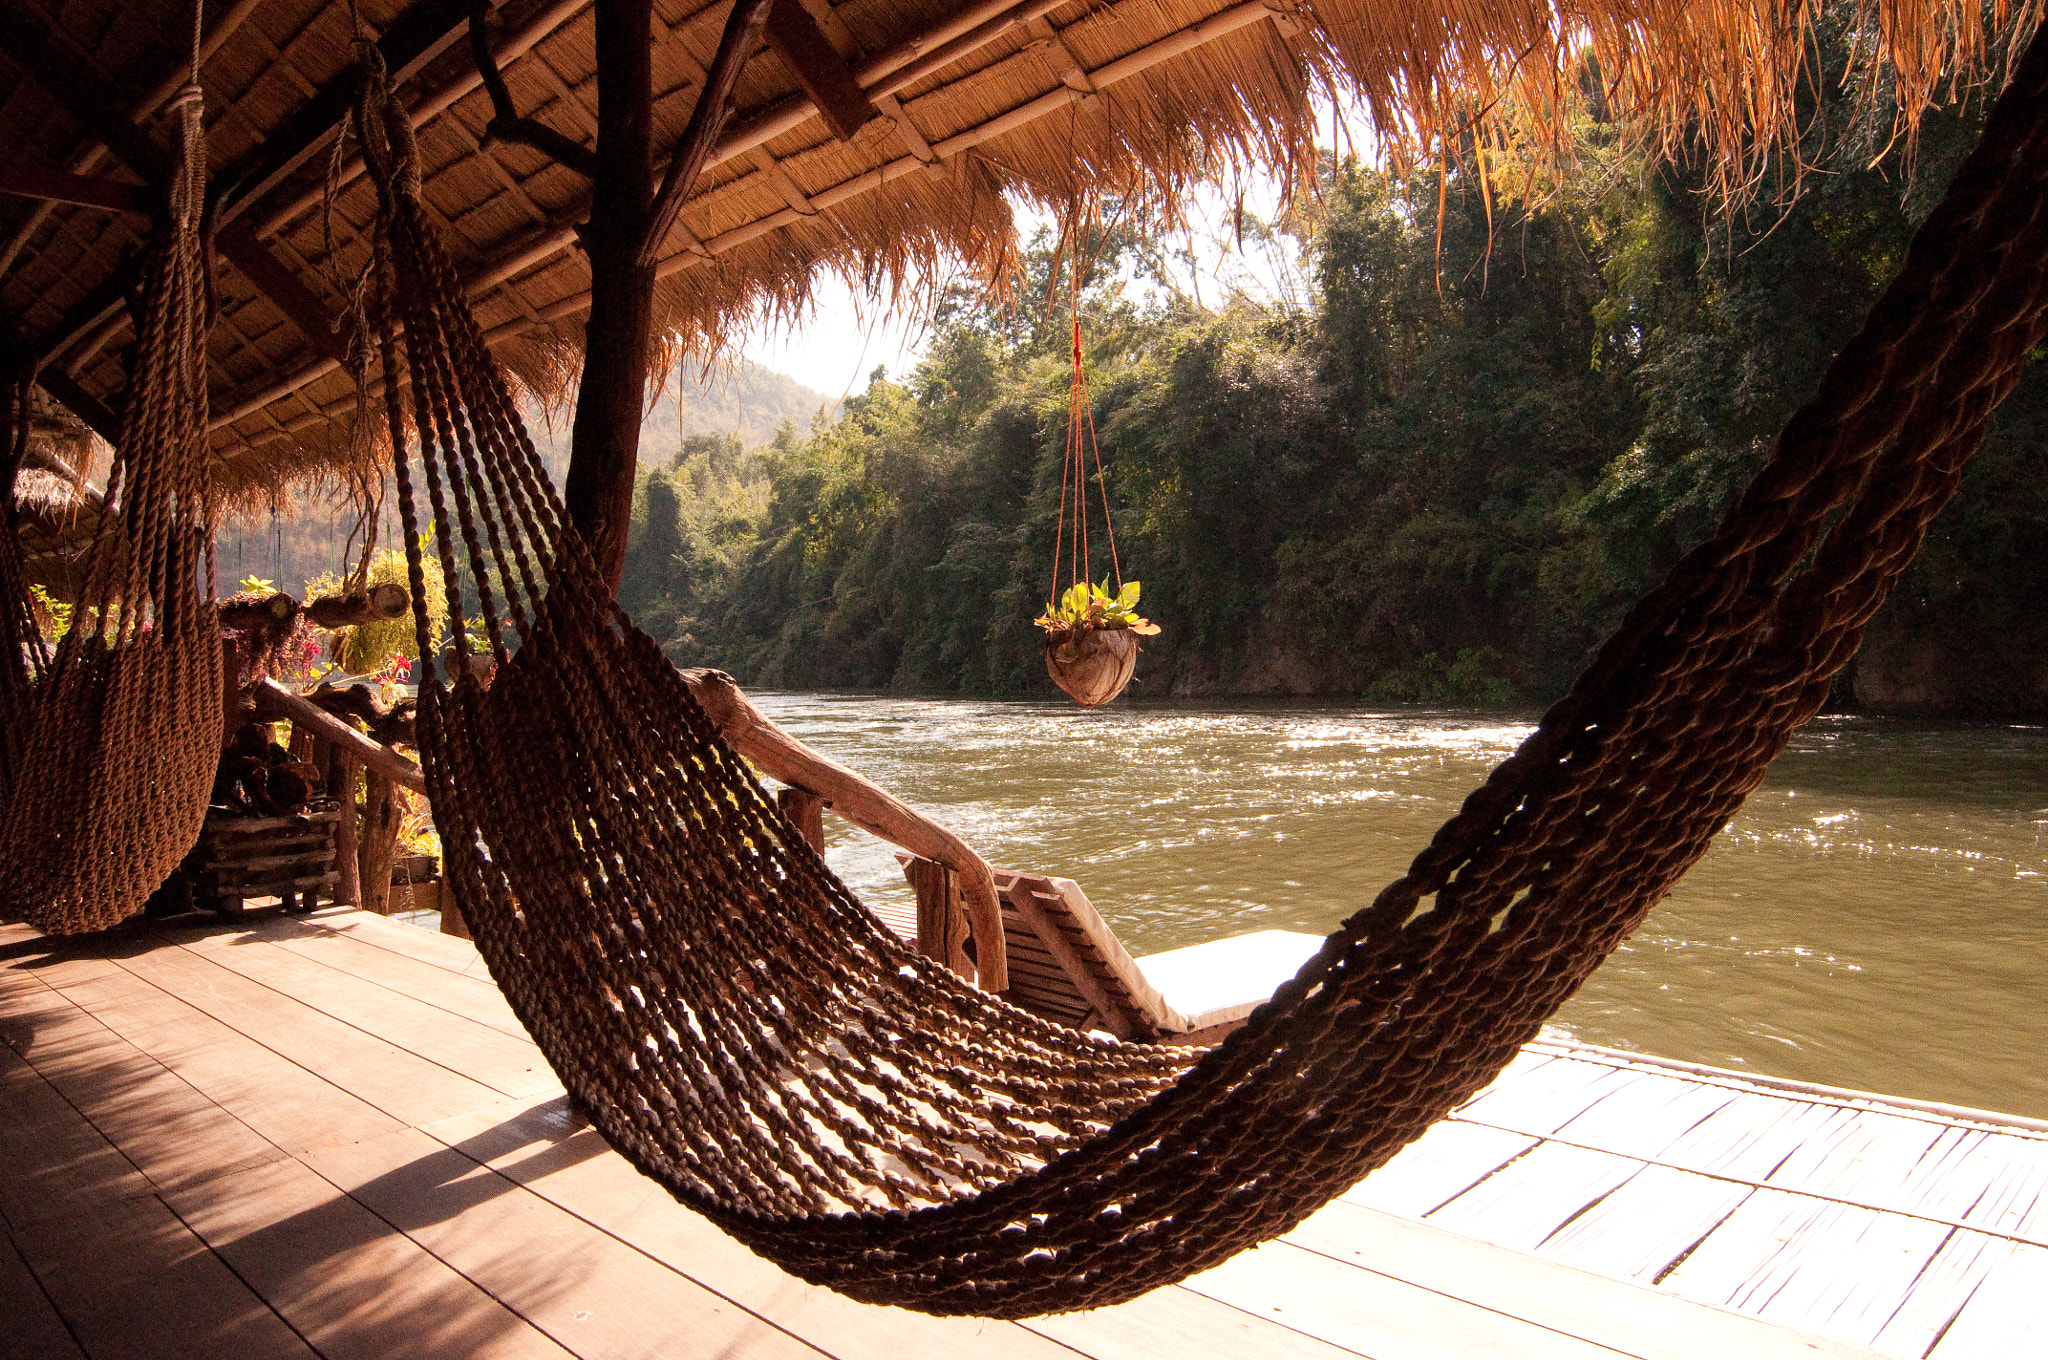 Hammock under a Shelter next to a River